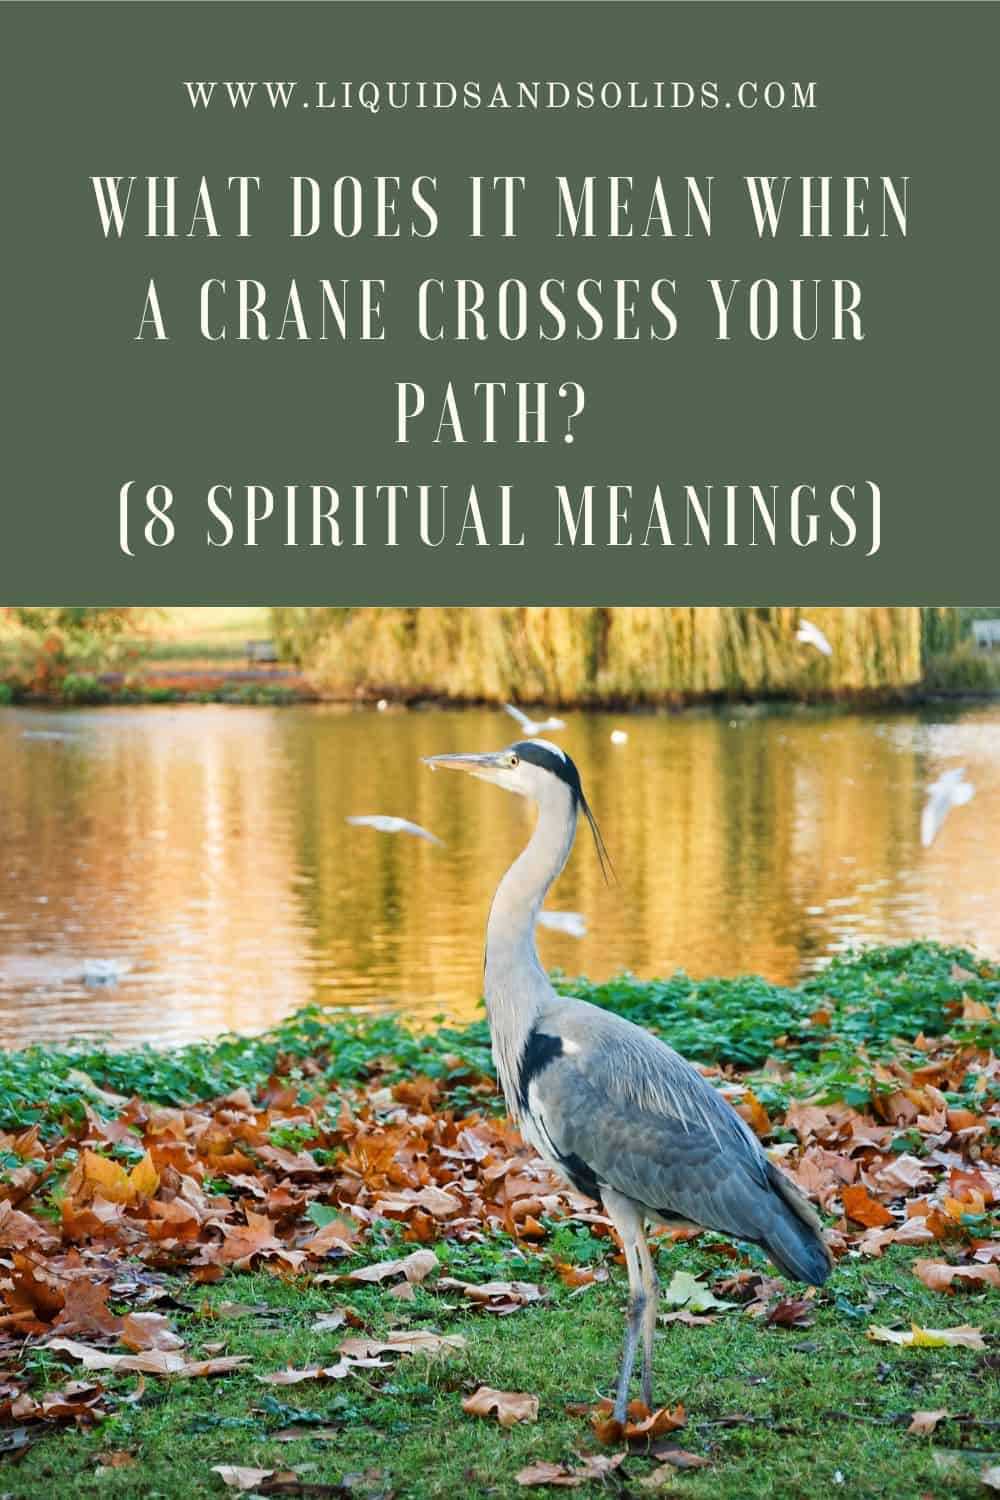 What Does It Mean When A Crane Crosses Your Path? (8 Spiritual Meanings)